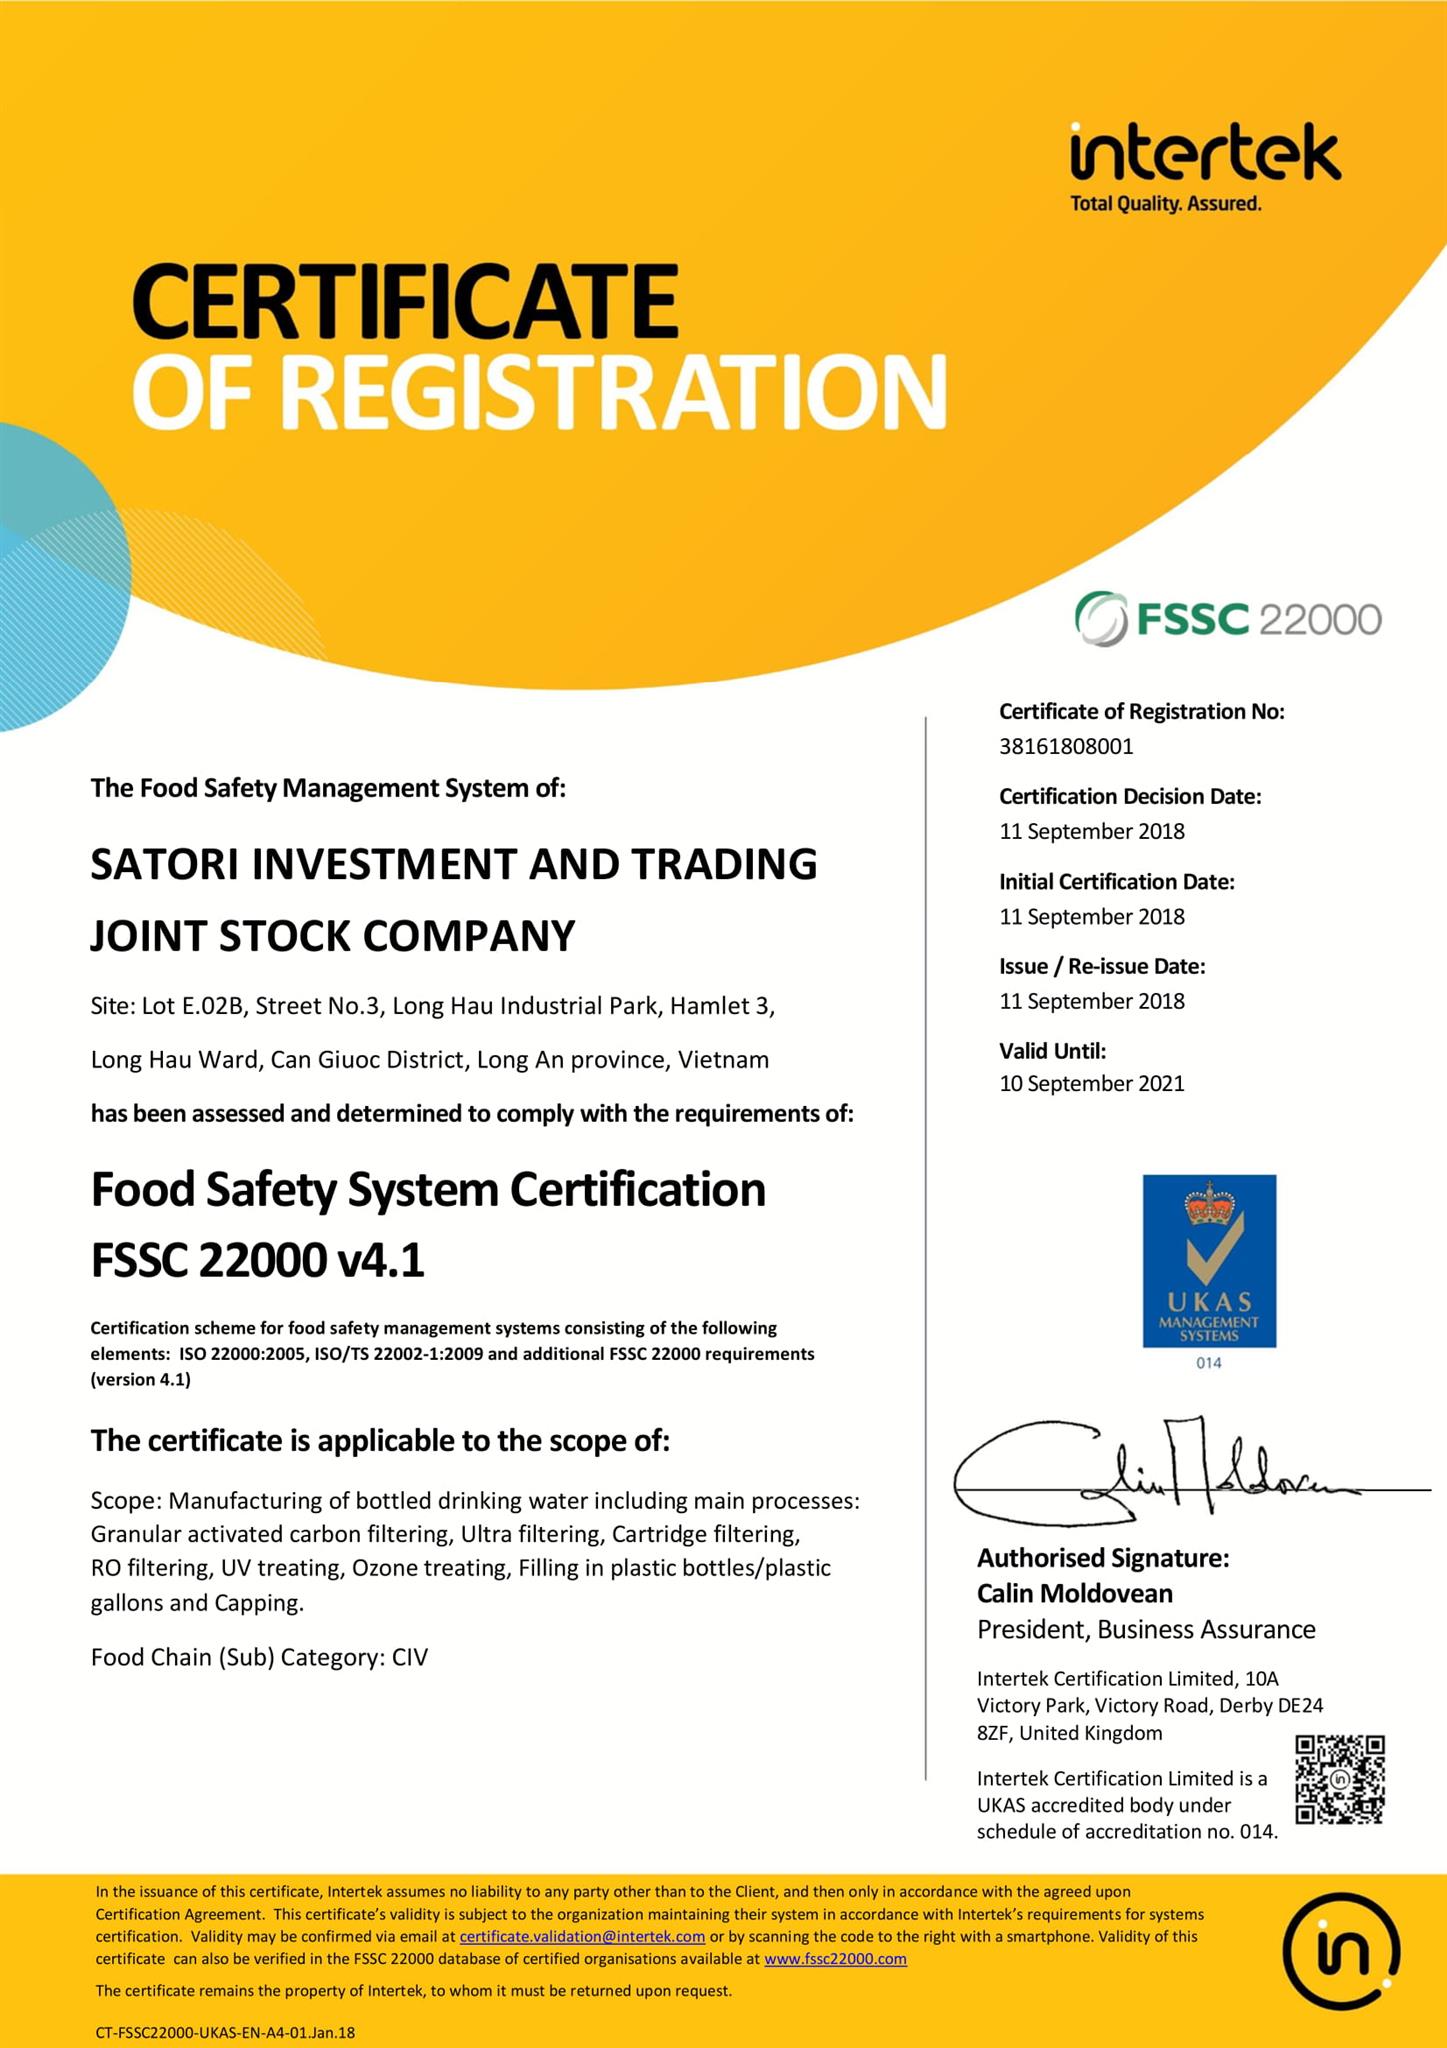 FSSC 22000 SATORI INVESTMENT AND TRADING JOINT STOCK COMPANY 1 1